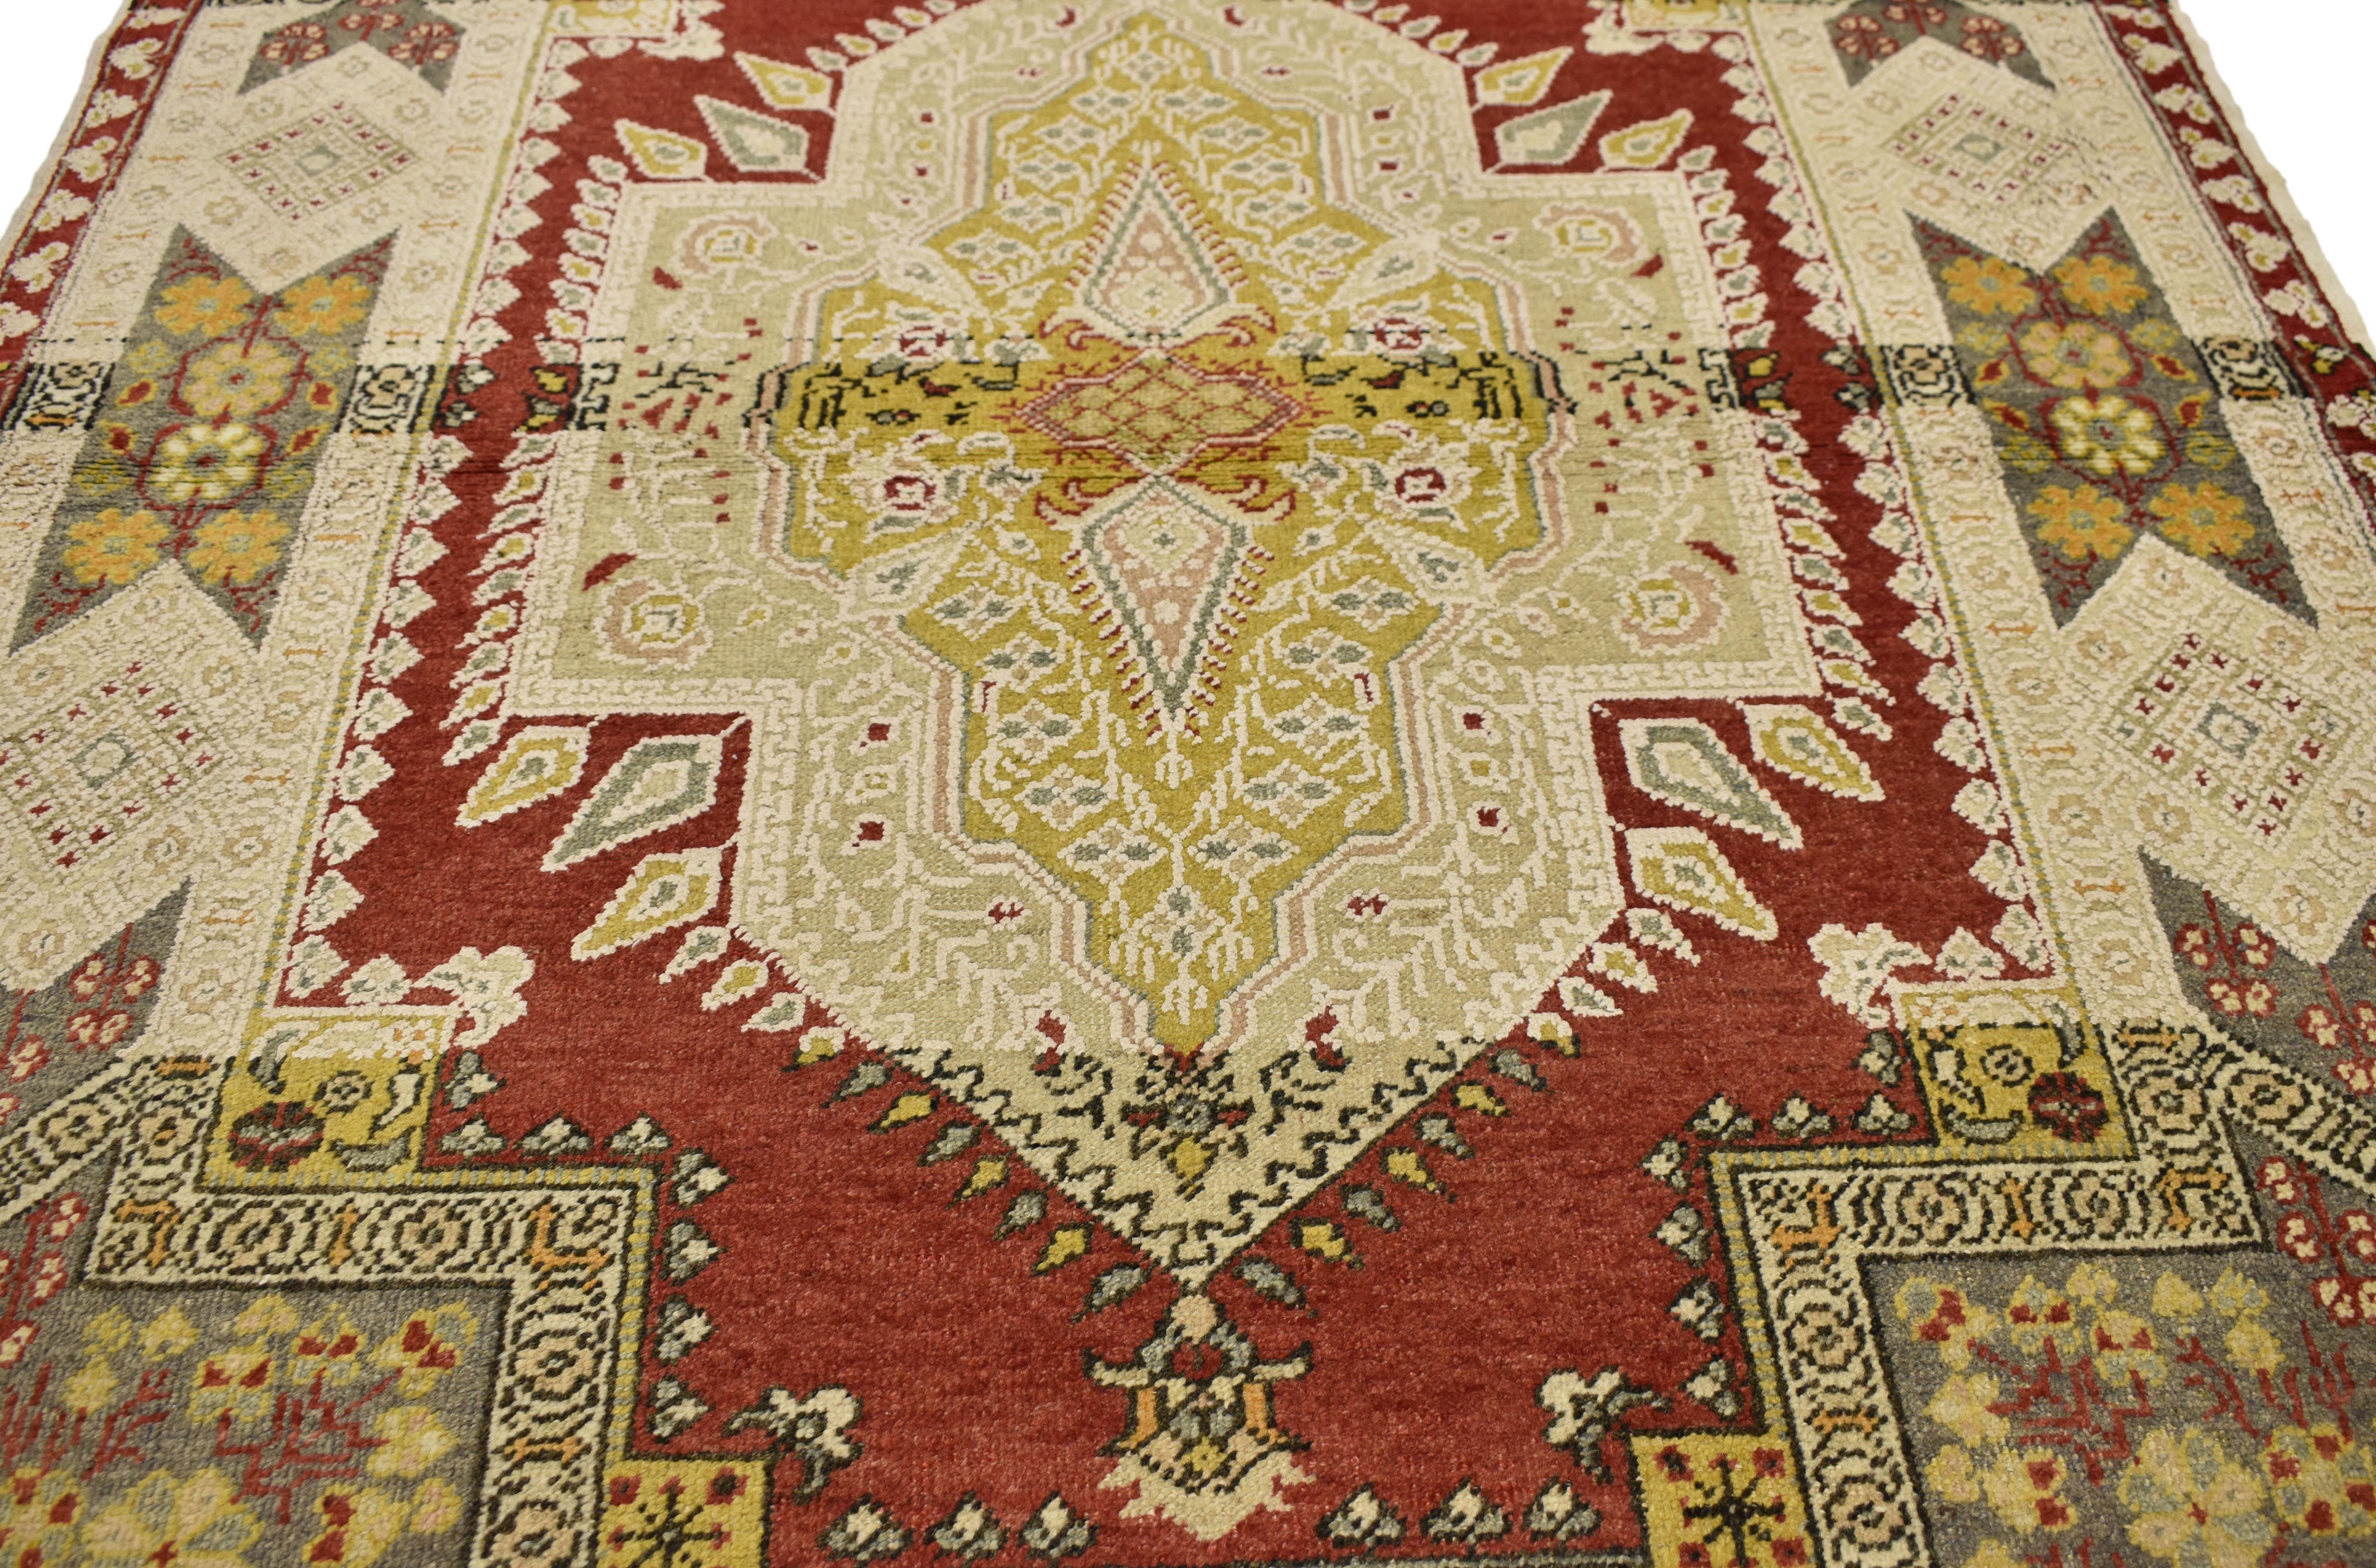 51293, Rustic style vintage Turkish Oushak accent rug, entry or foyer rug. This rustic style vintage Turkish Oushak rug features a modern traditional style. Immersed in Anatolian history and refined colors, this vintage Oushak rug combines